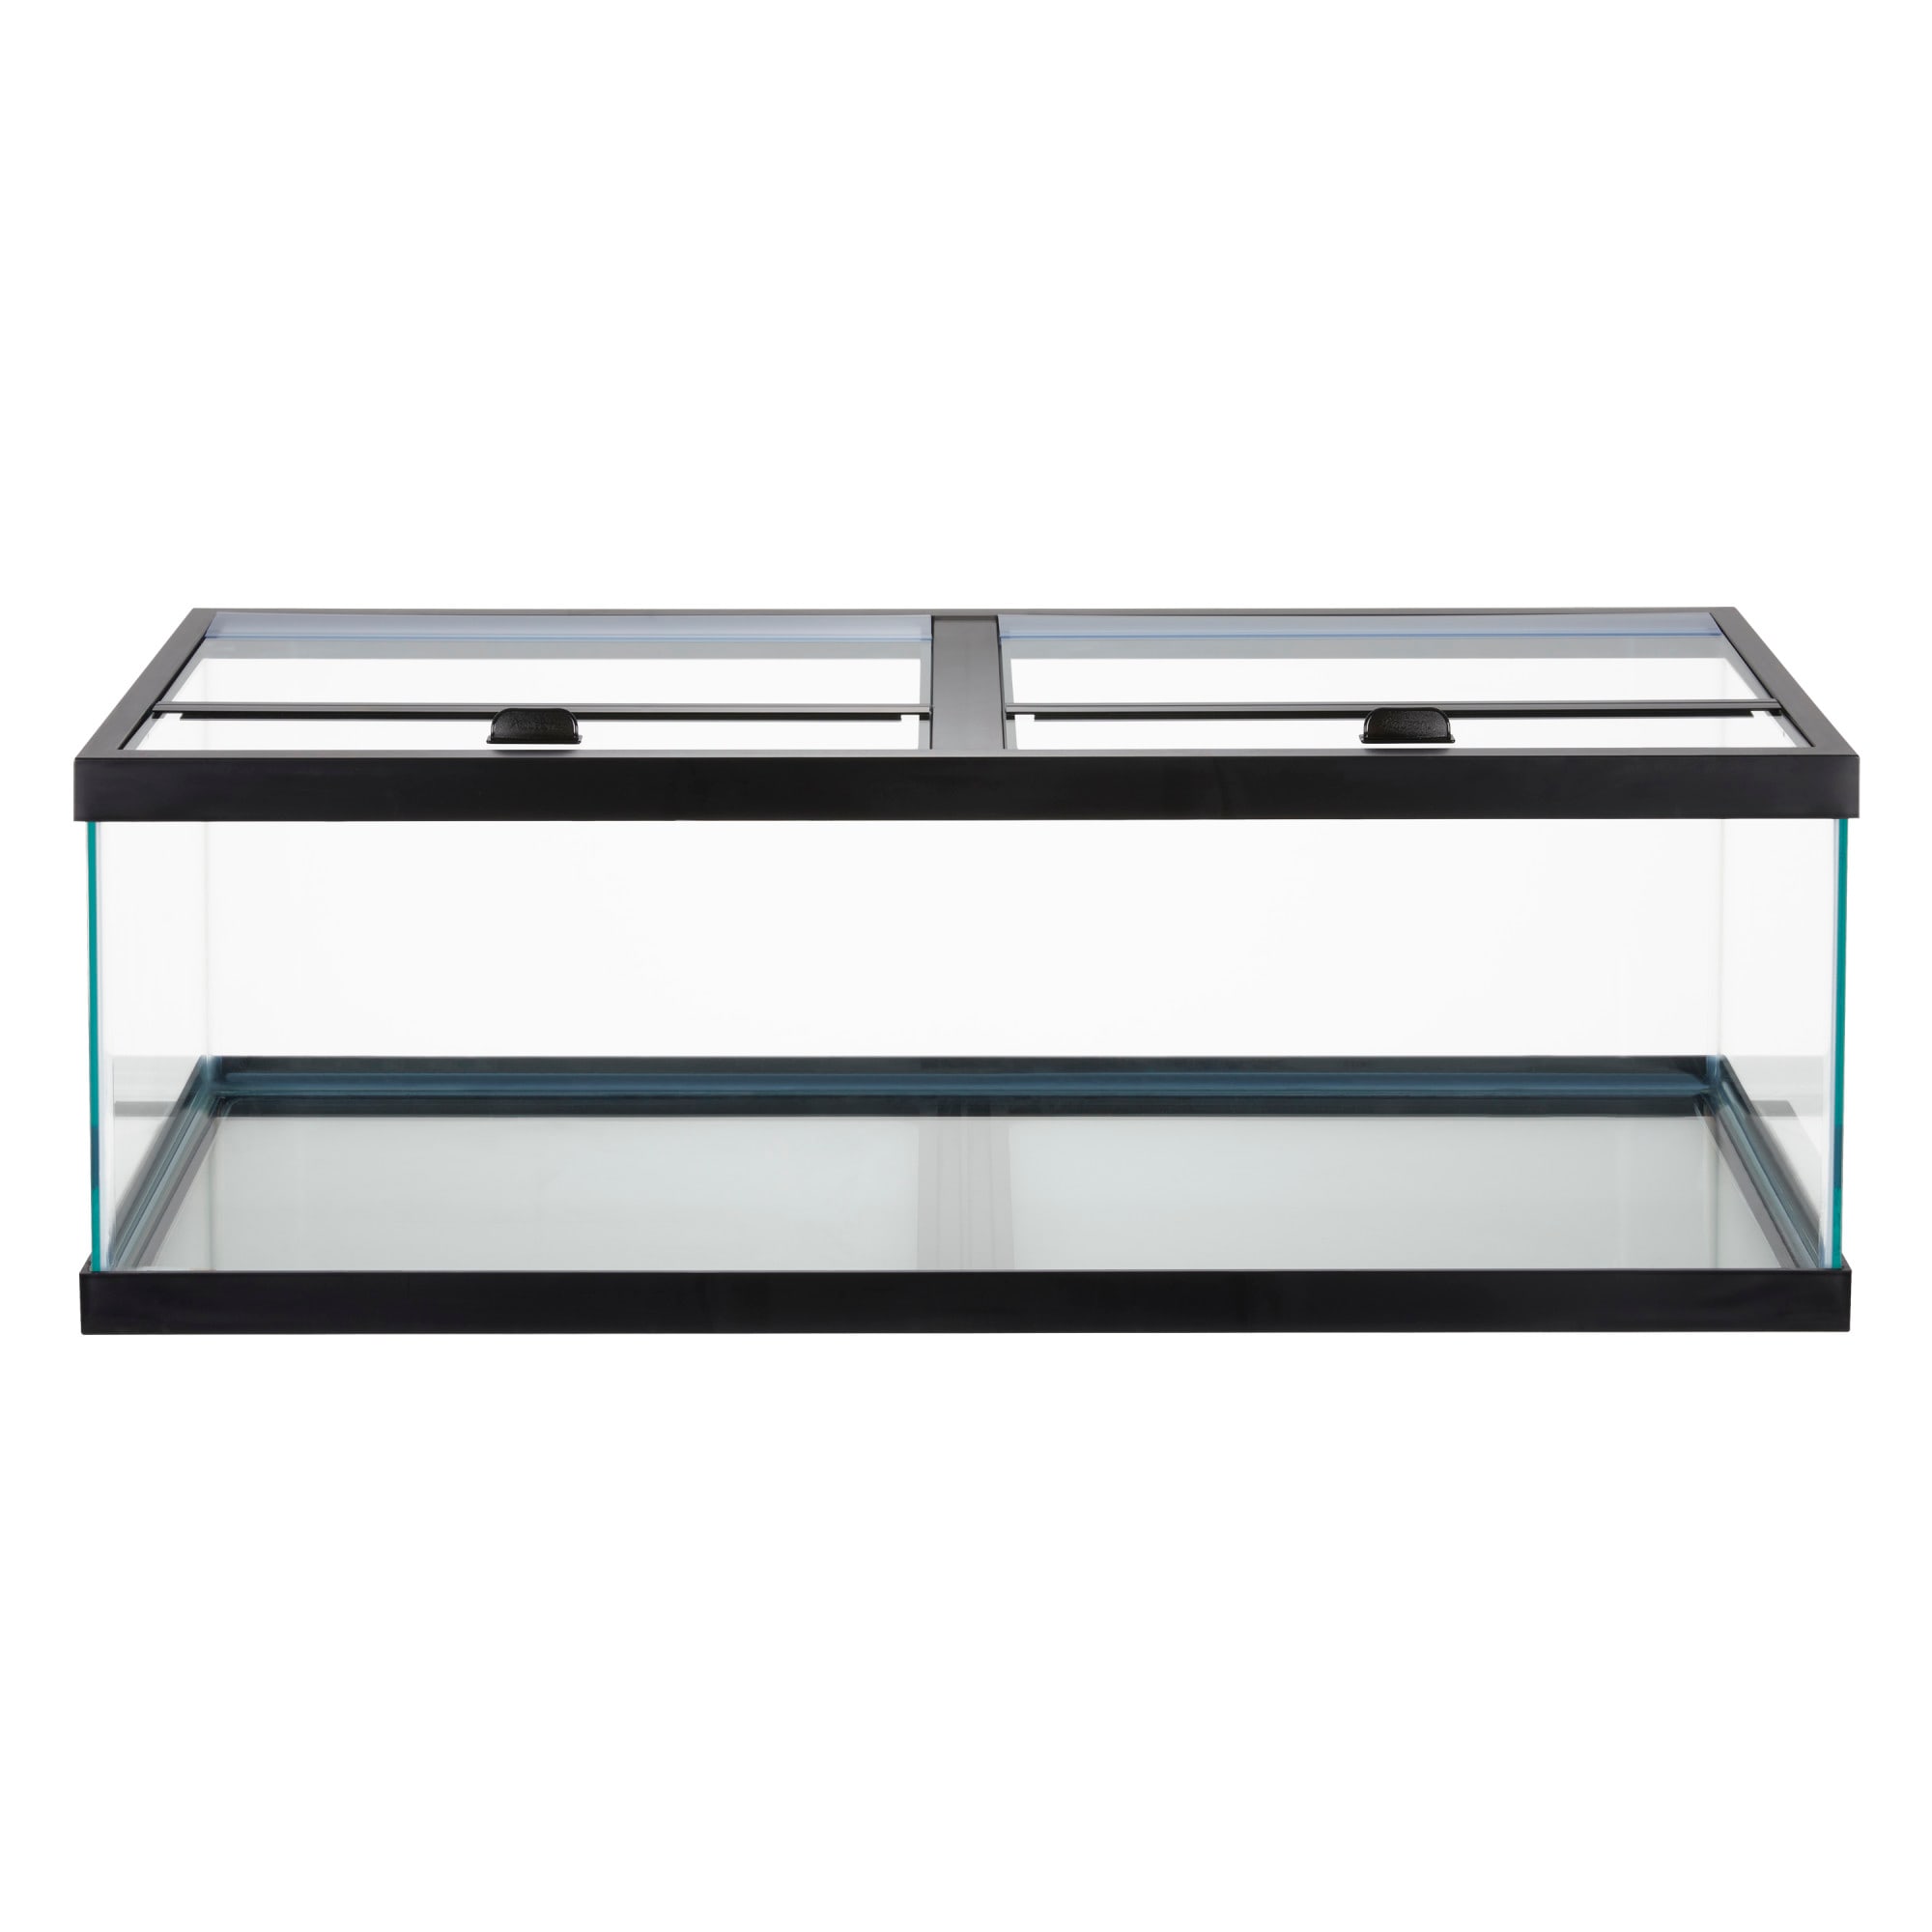 Best 60 Gallon Aquarium With Stand for sale in Elk Grove, California for  2024